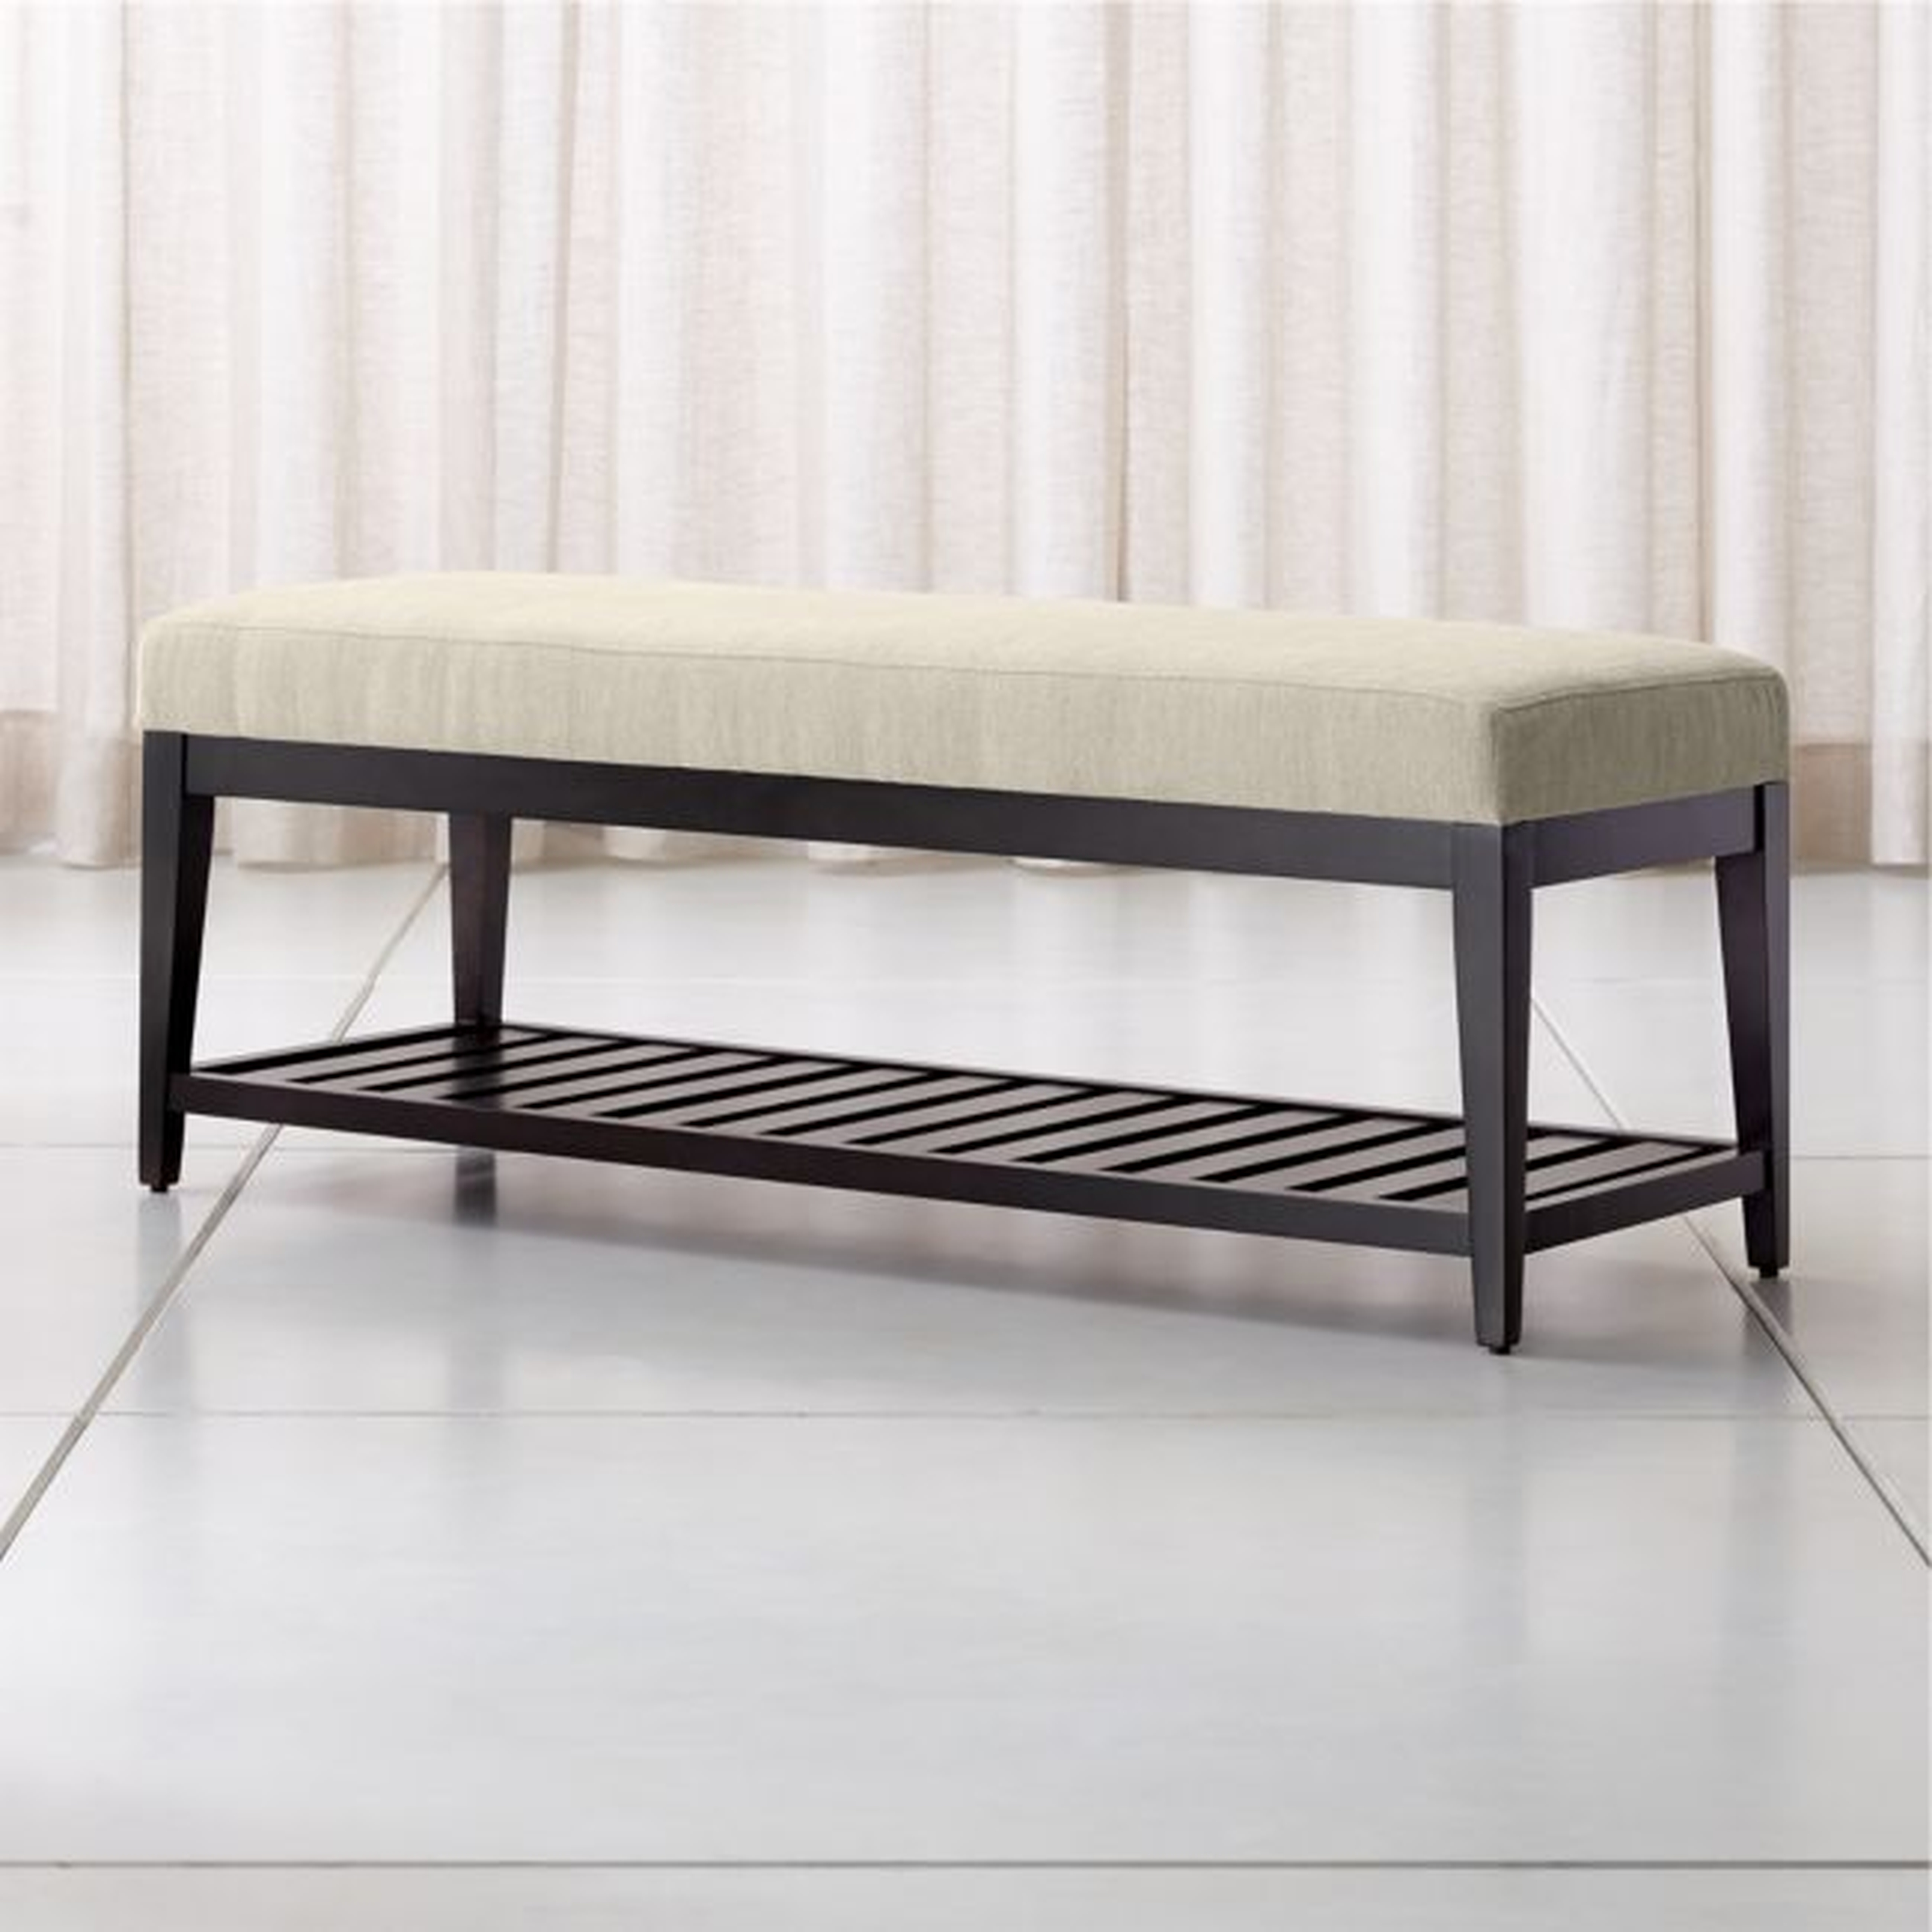 Nash Small Bench with Slats - Crate and Barrel